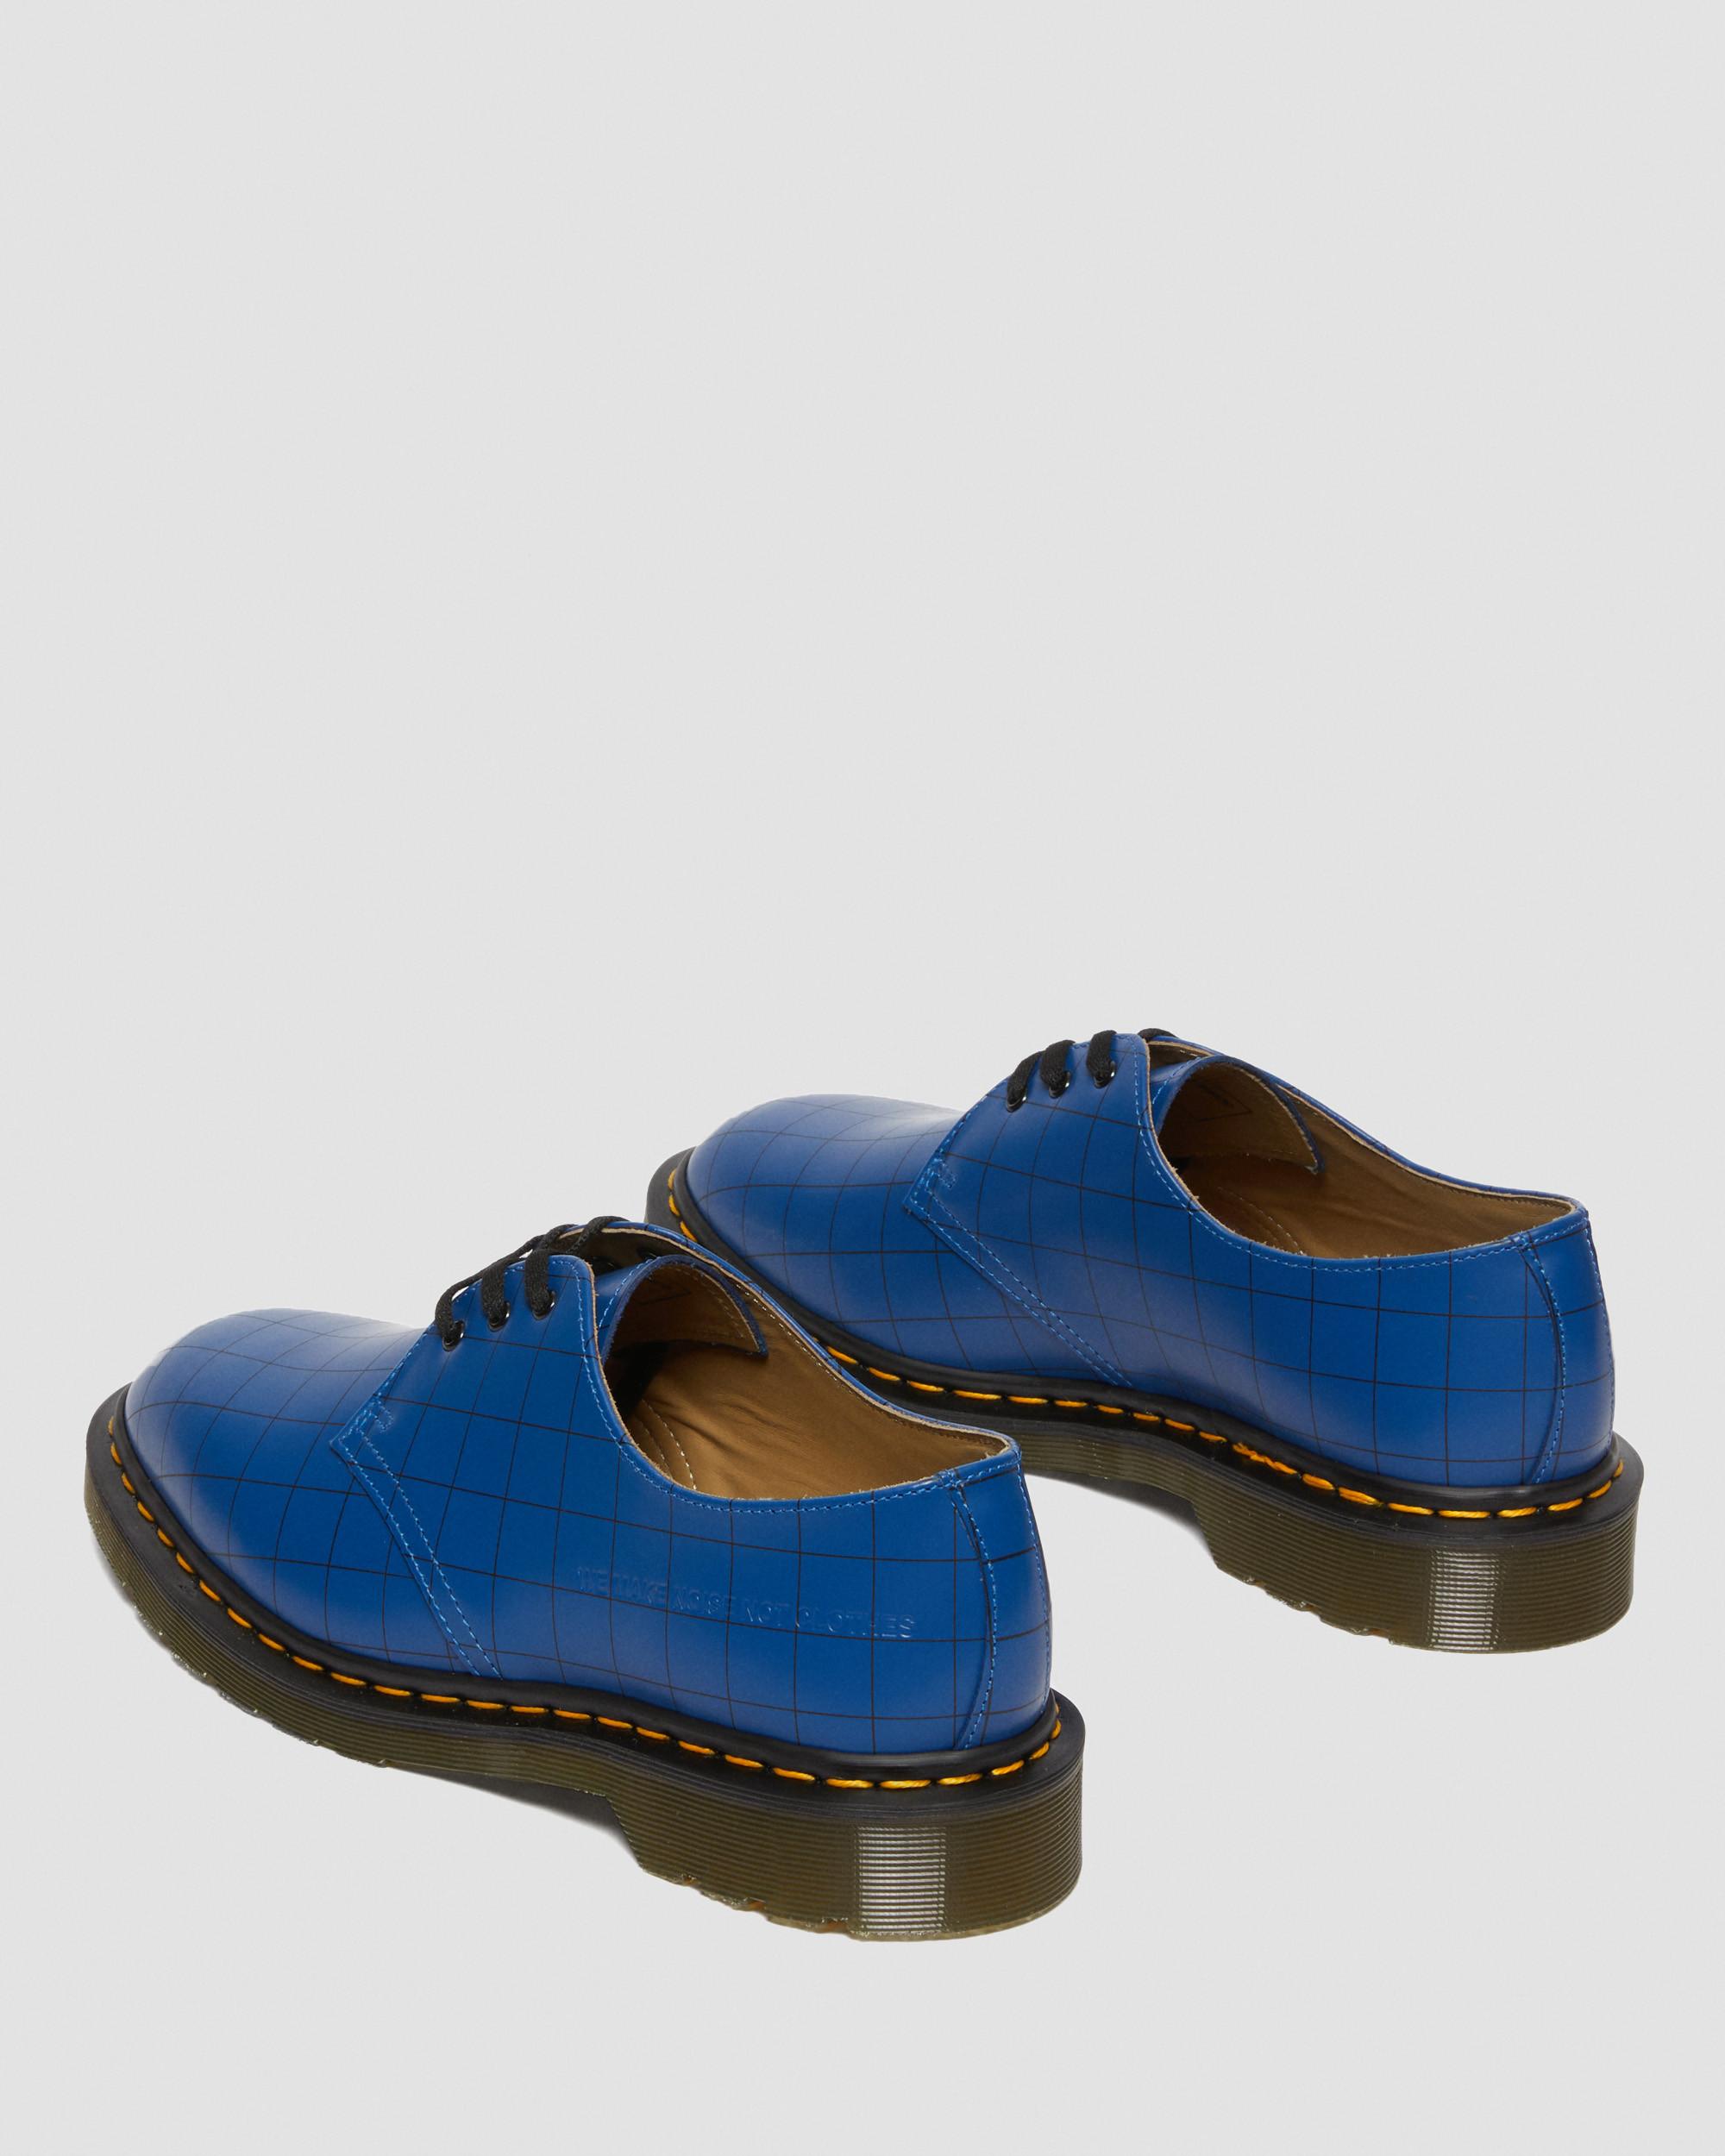 1461 Undercover Made in England Leather Oxford Shoes in Blue